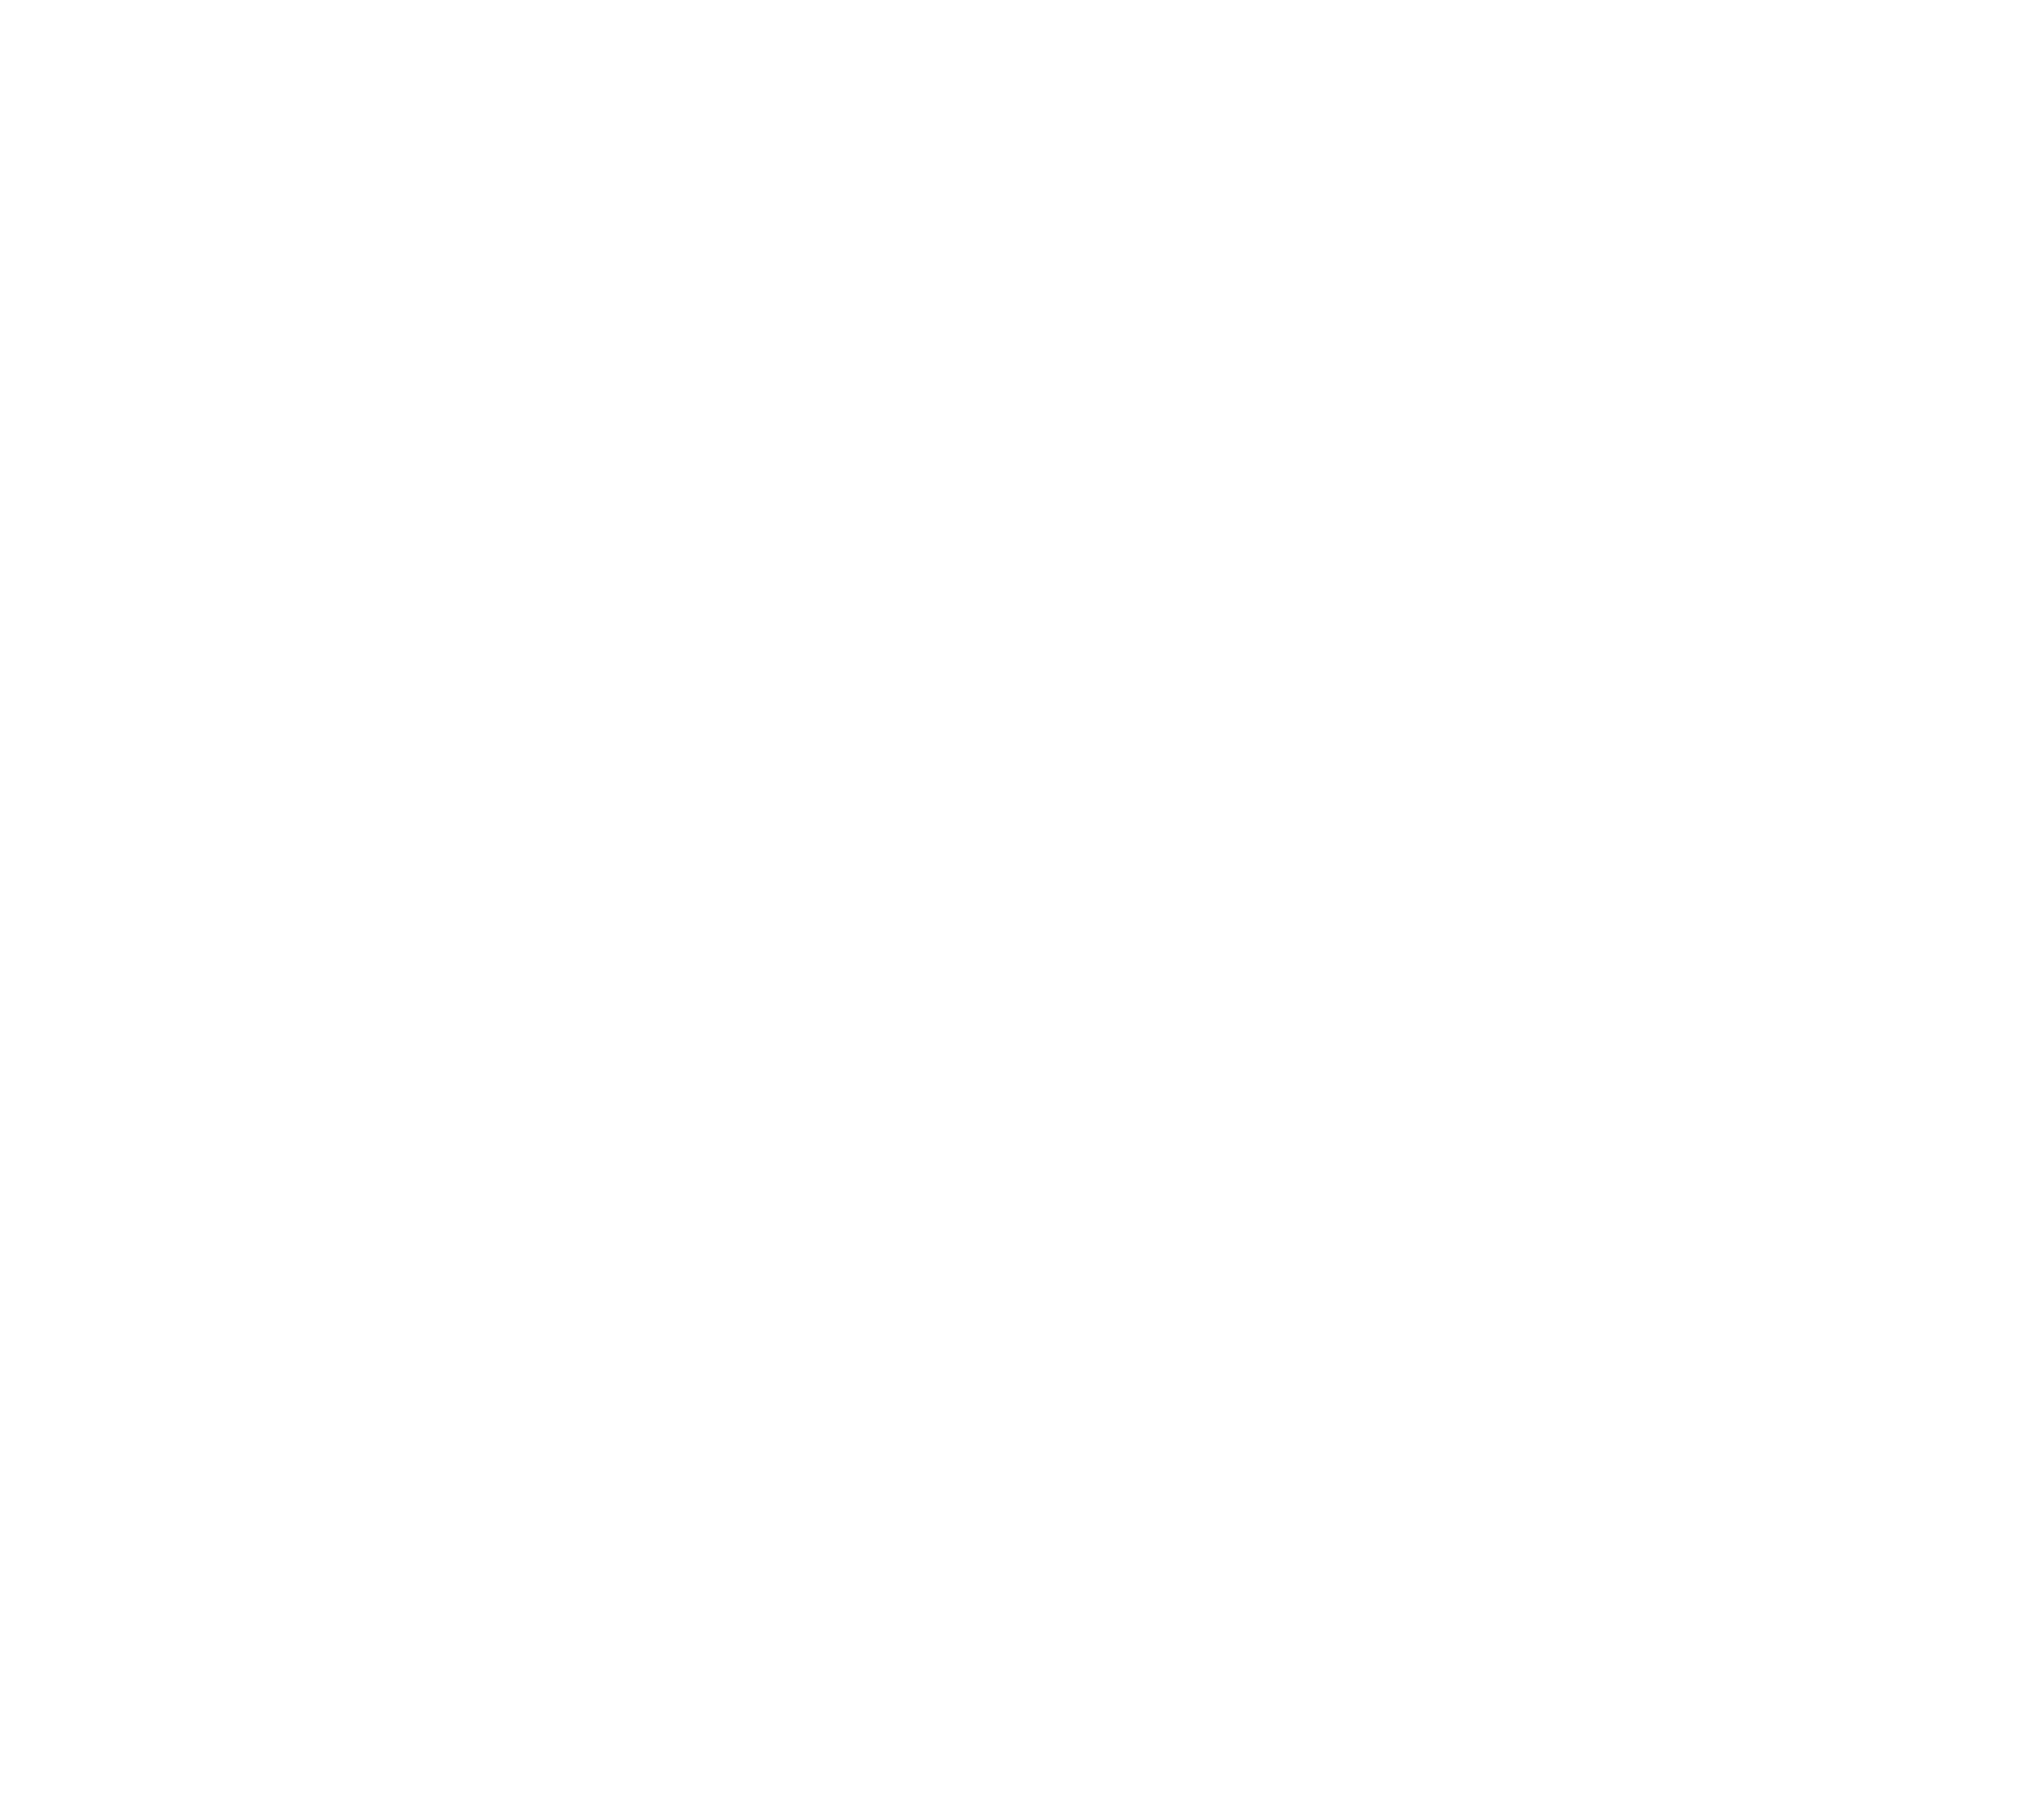 warning sign clip art black and white